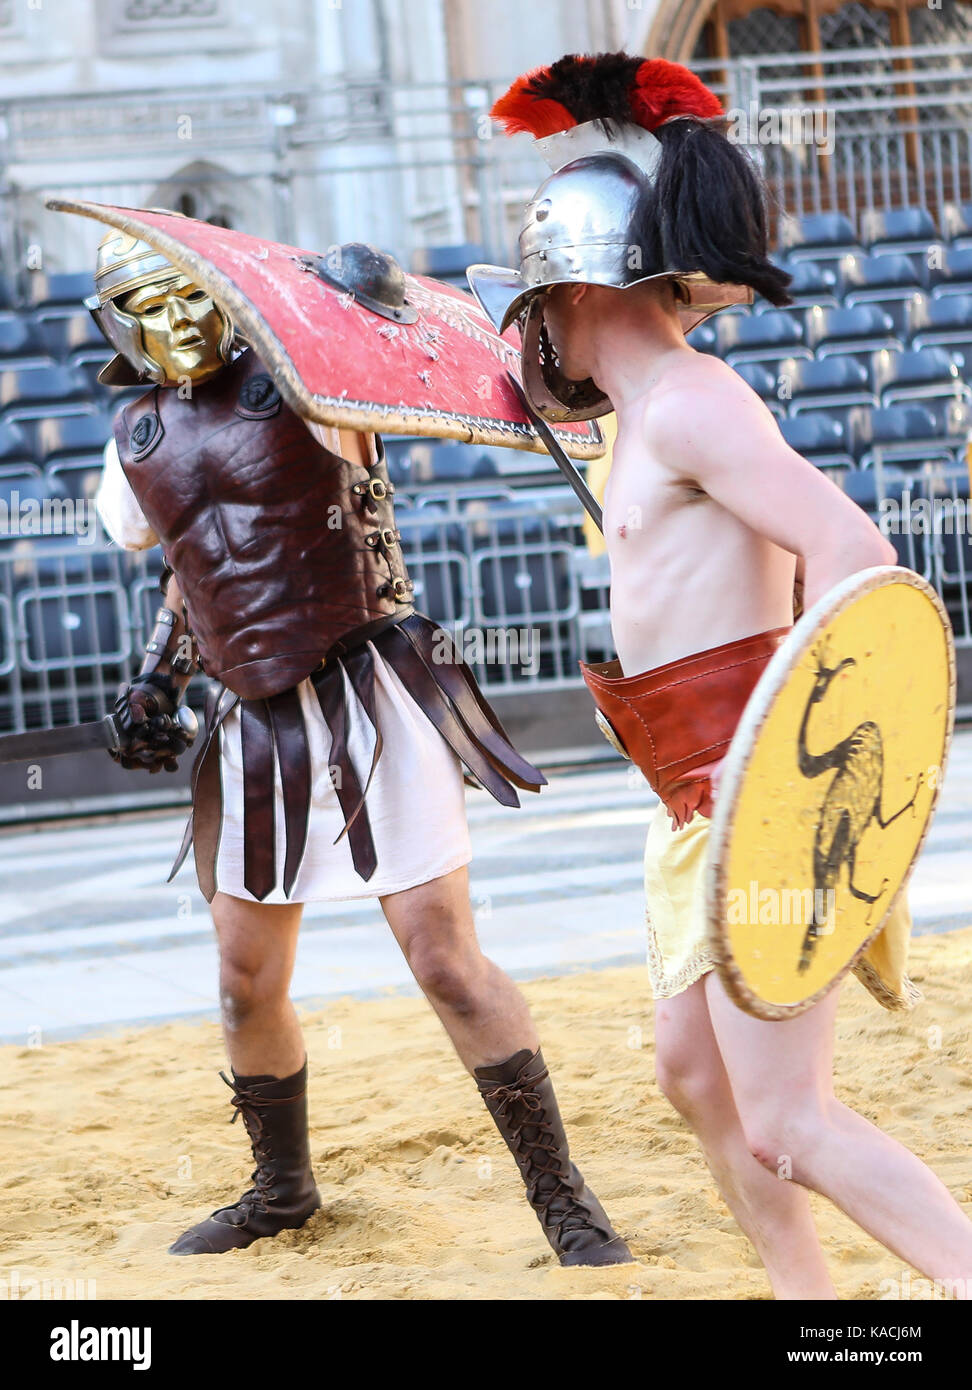 Gladiators fight it out in an epic battle of swords and shields as part of Londinium, a season of events hosted by the City of London Corporation. The Gladiator Games, staged by the Museum of London, run until Monday 29th August 2017.  Where: London, United Kingdom When: 25 Aug 2017 Credit: John Rainford/WENN.com Stock Photo